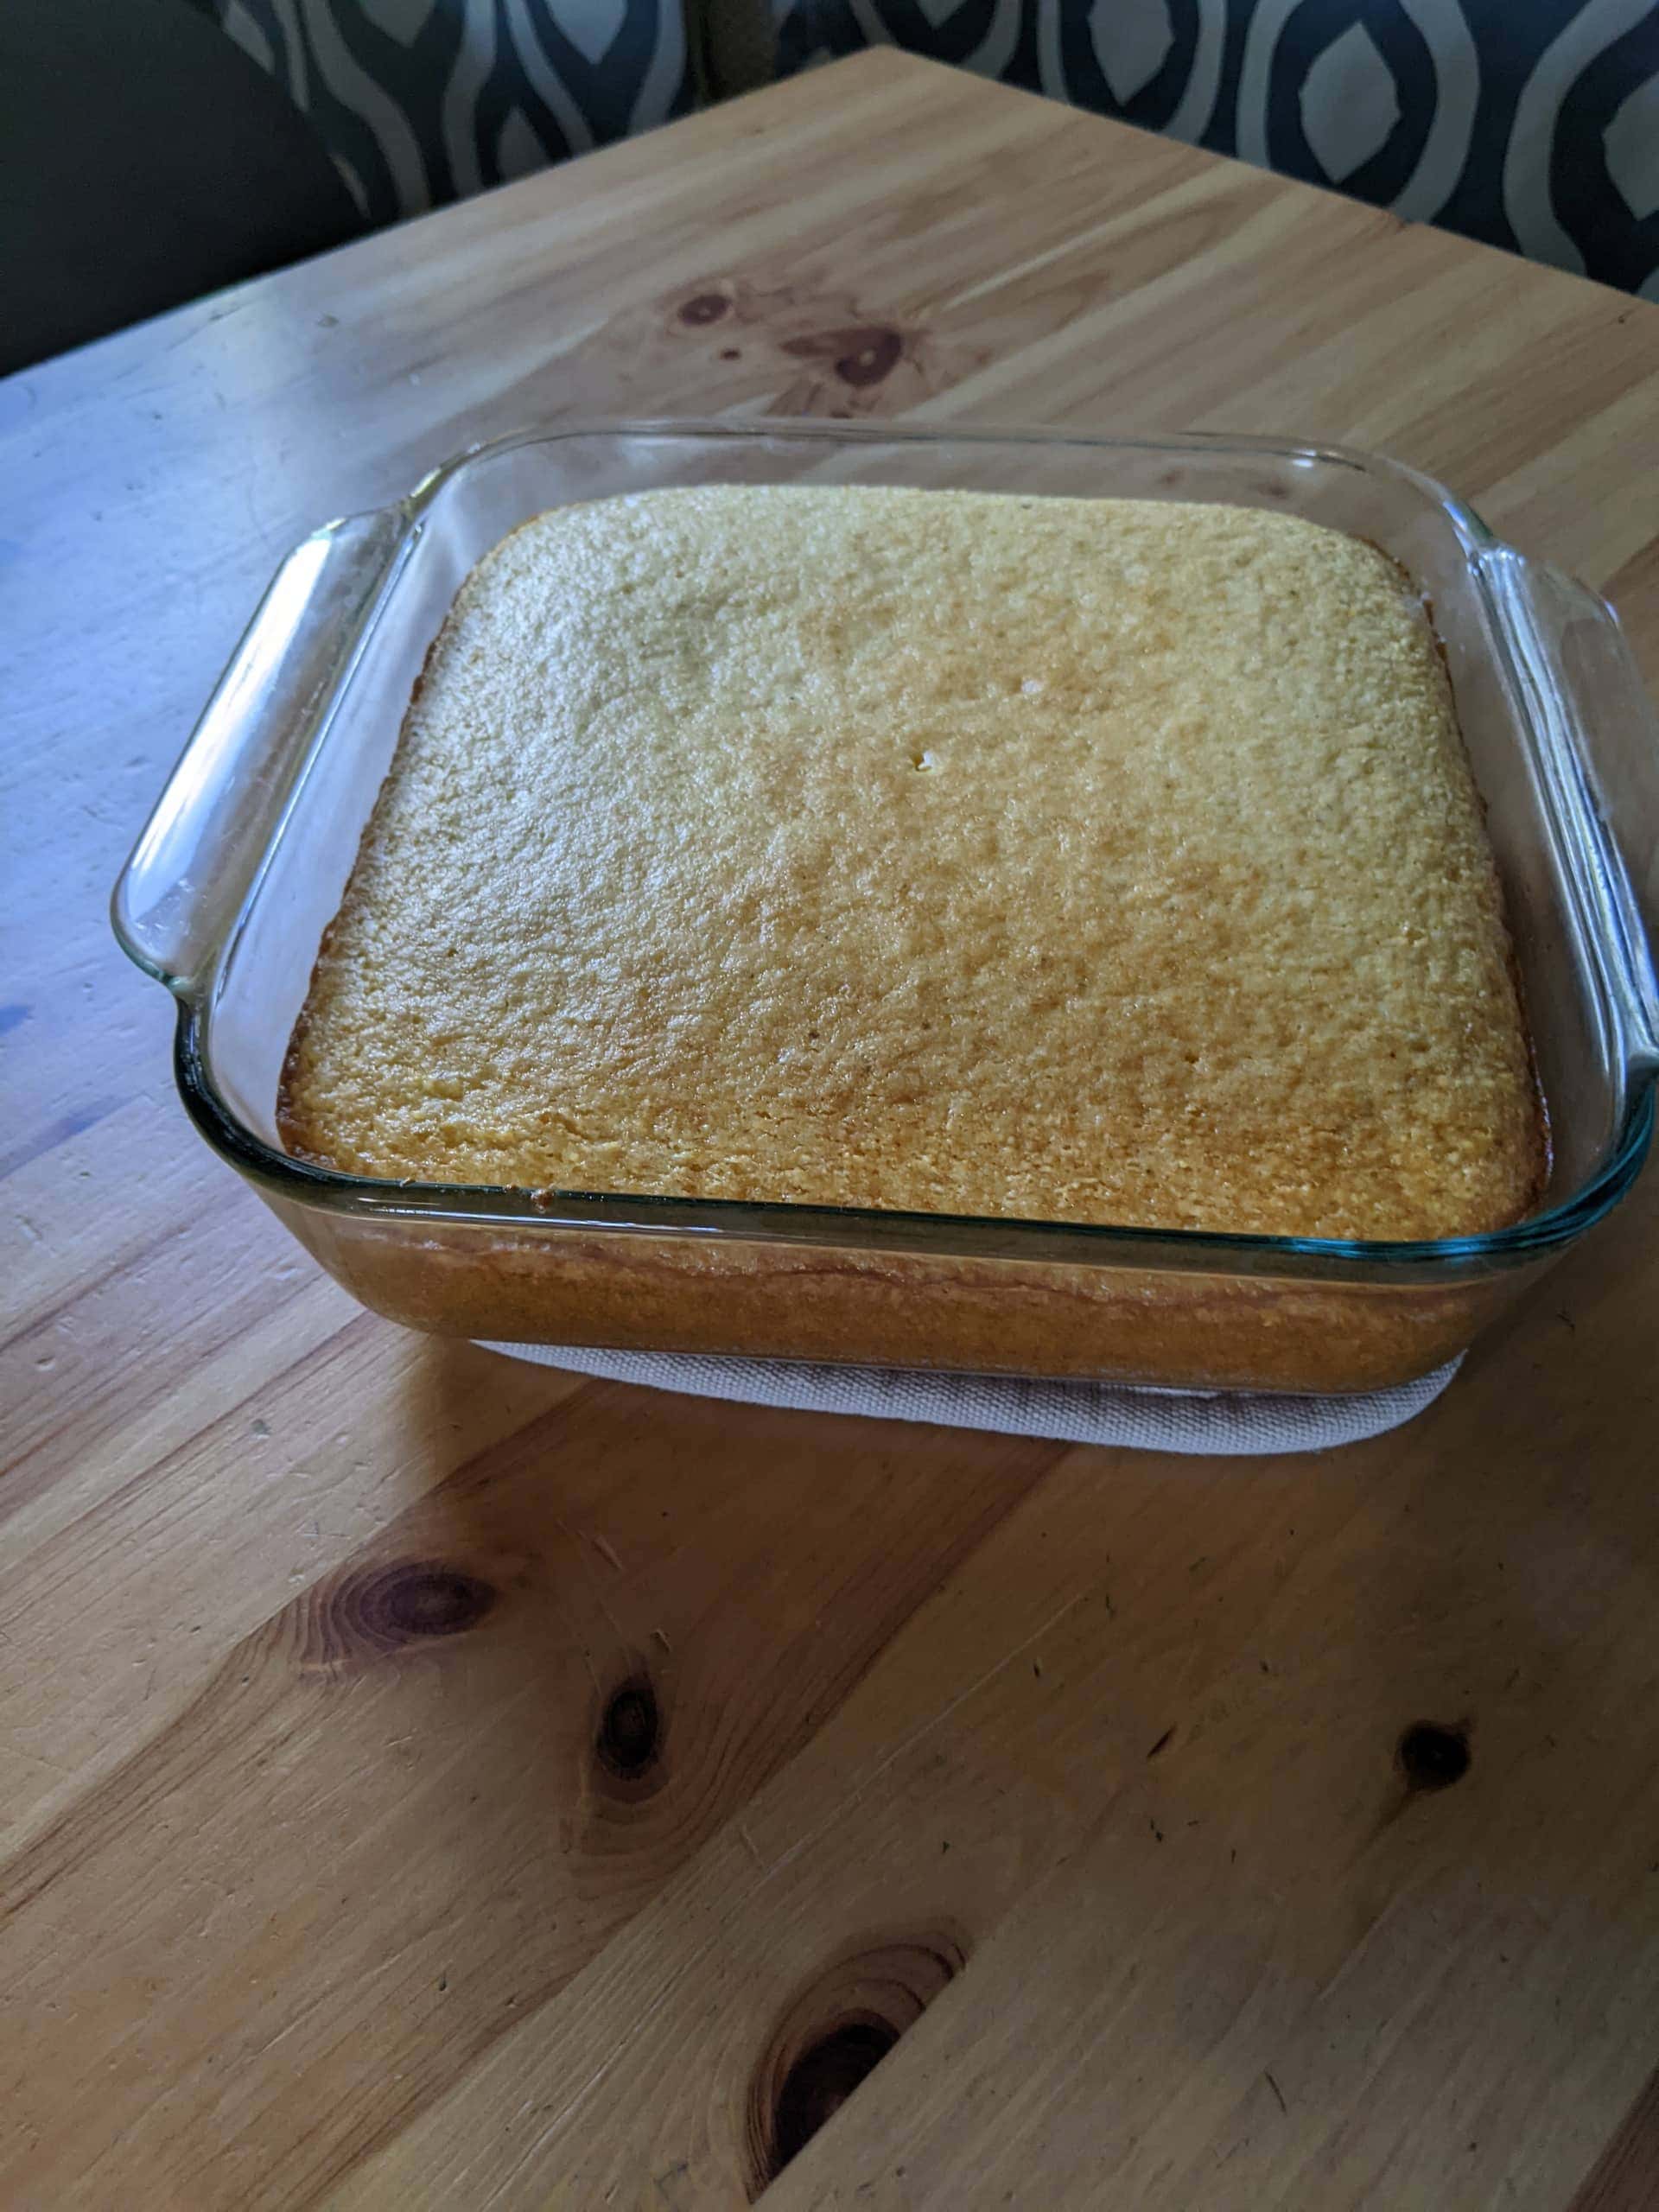 Cornbread fresh from the oven